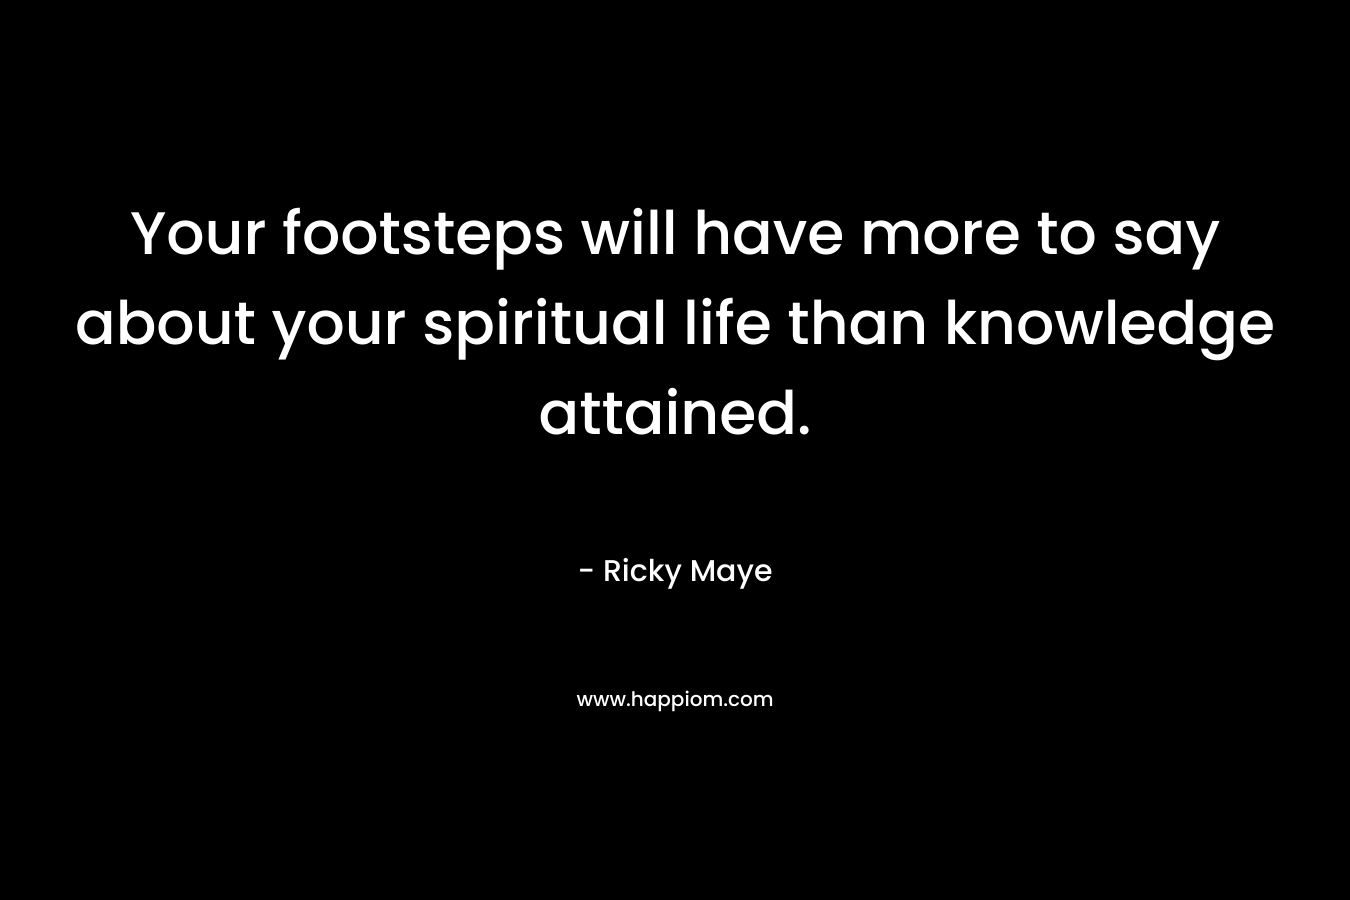 Your footsteps will have more to say about your spiritual life than knowledge attained.